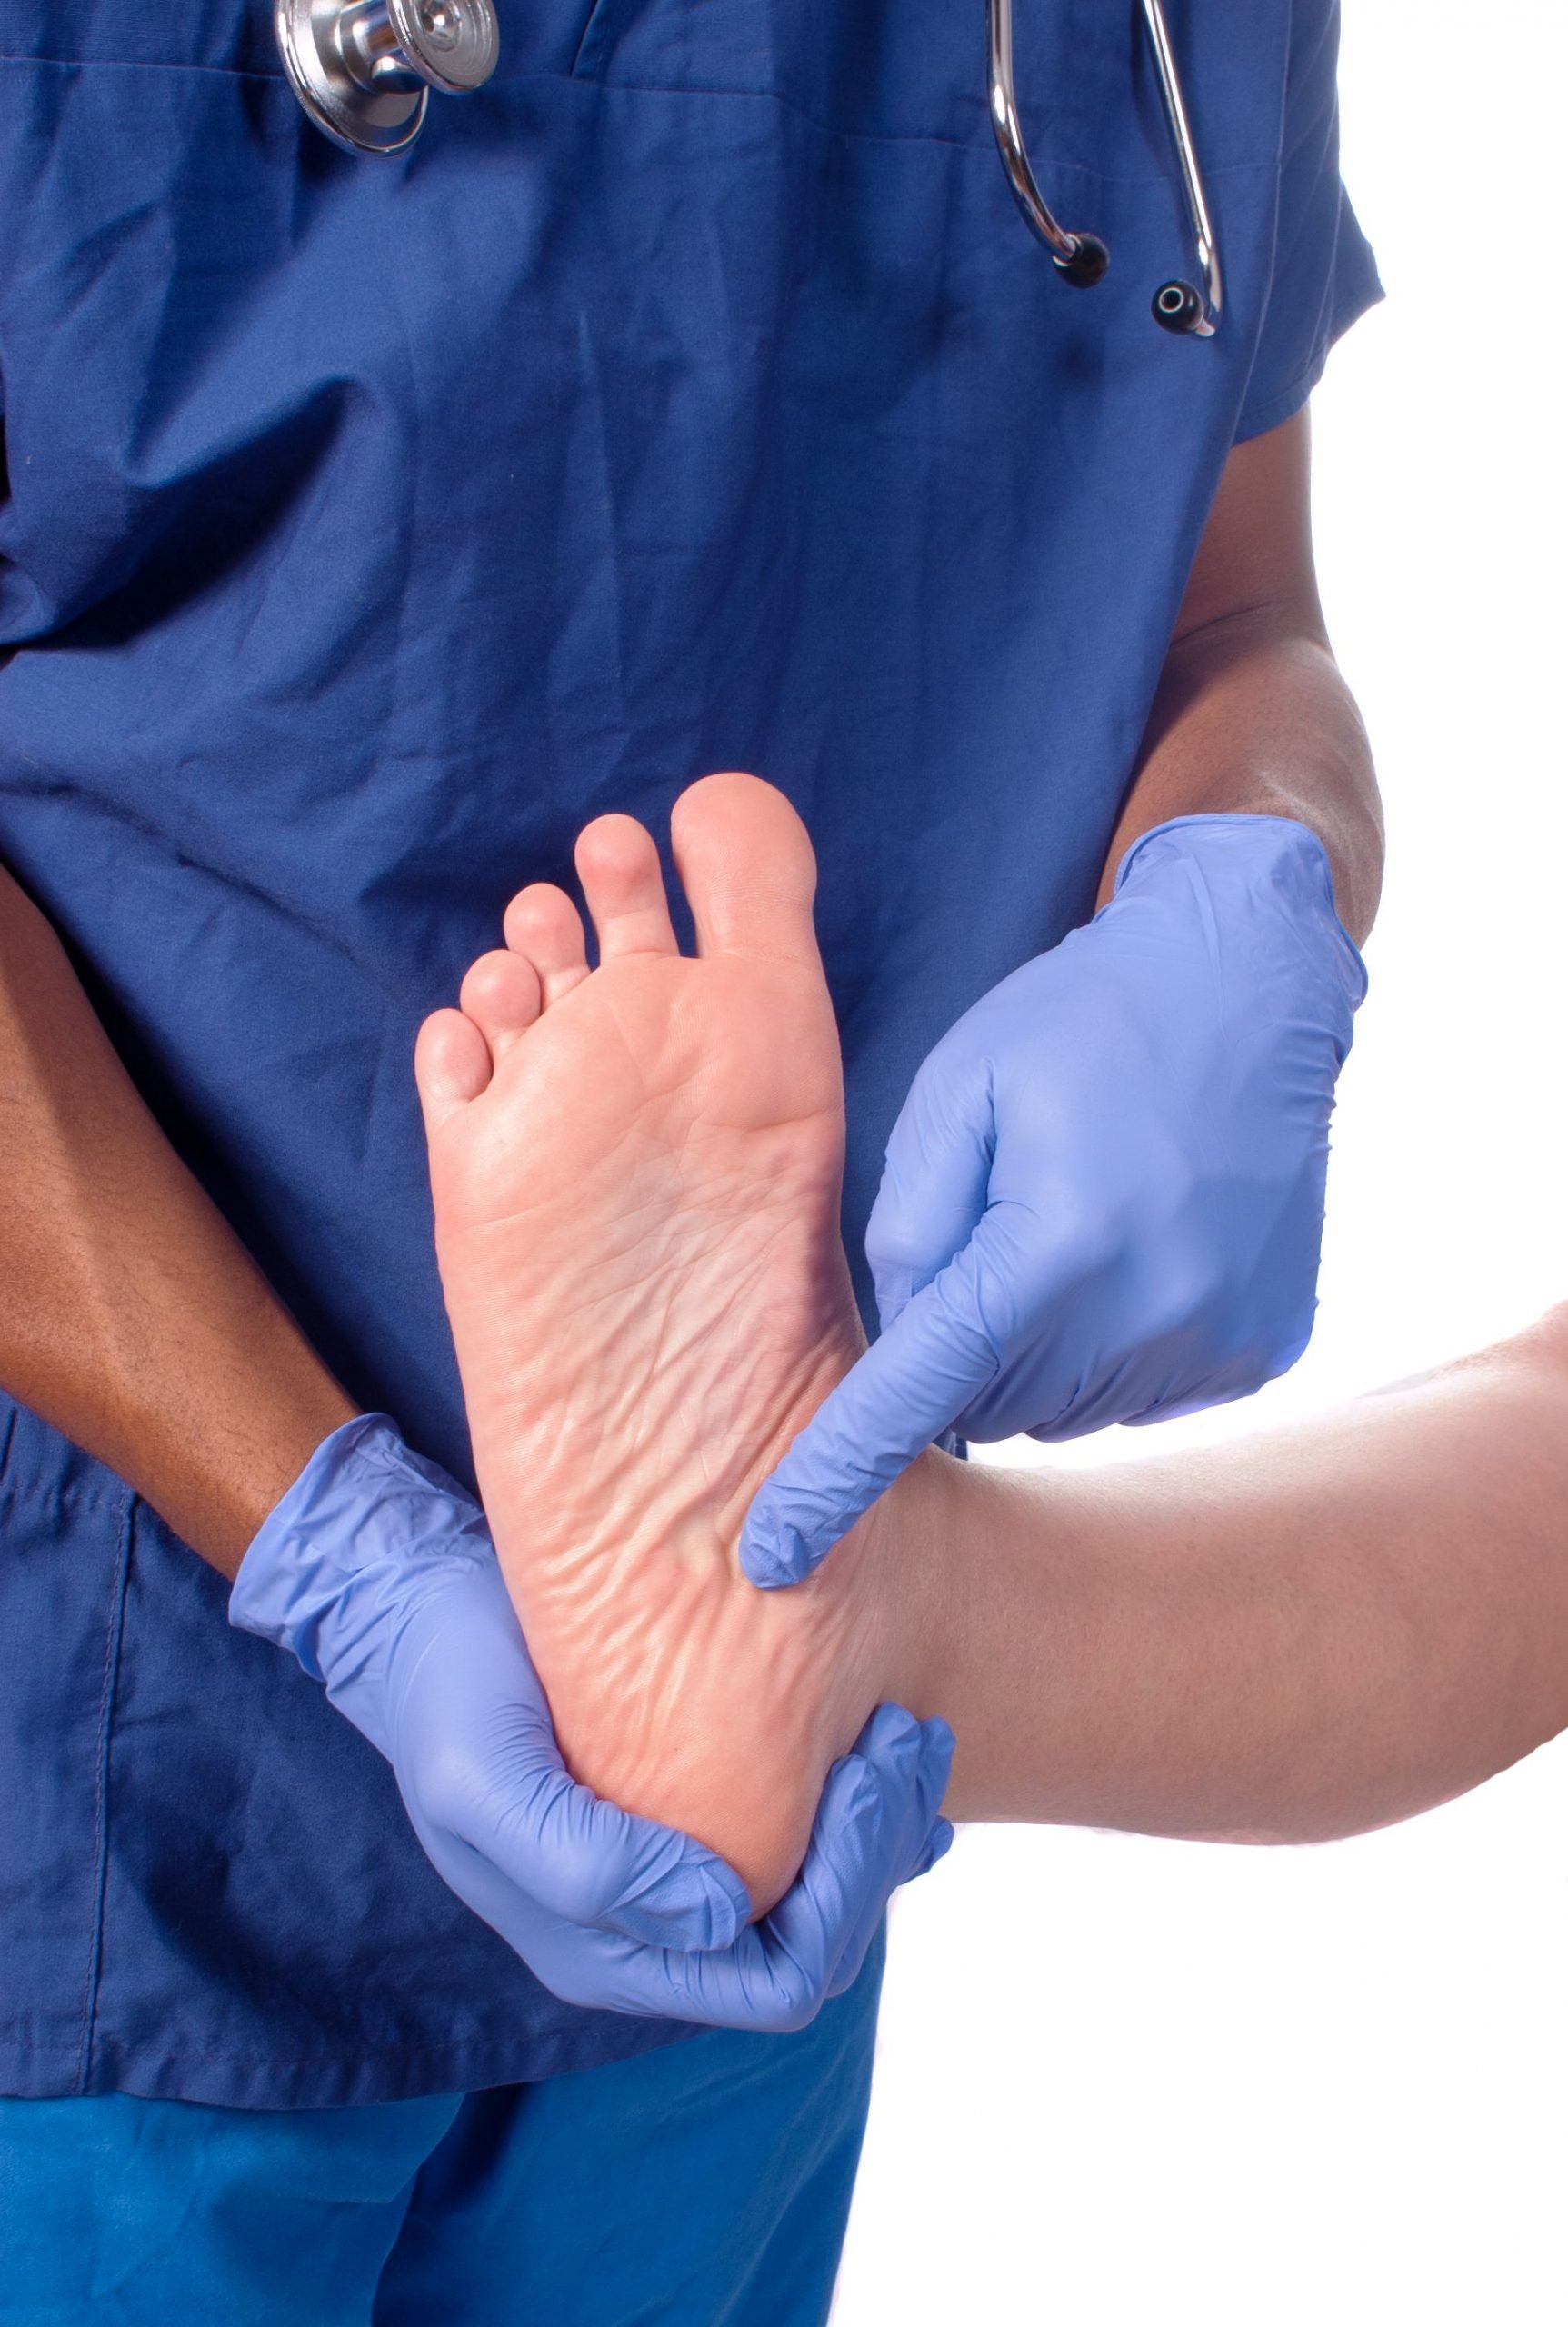 What causes neuropathy?